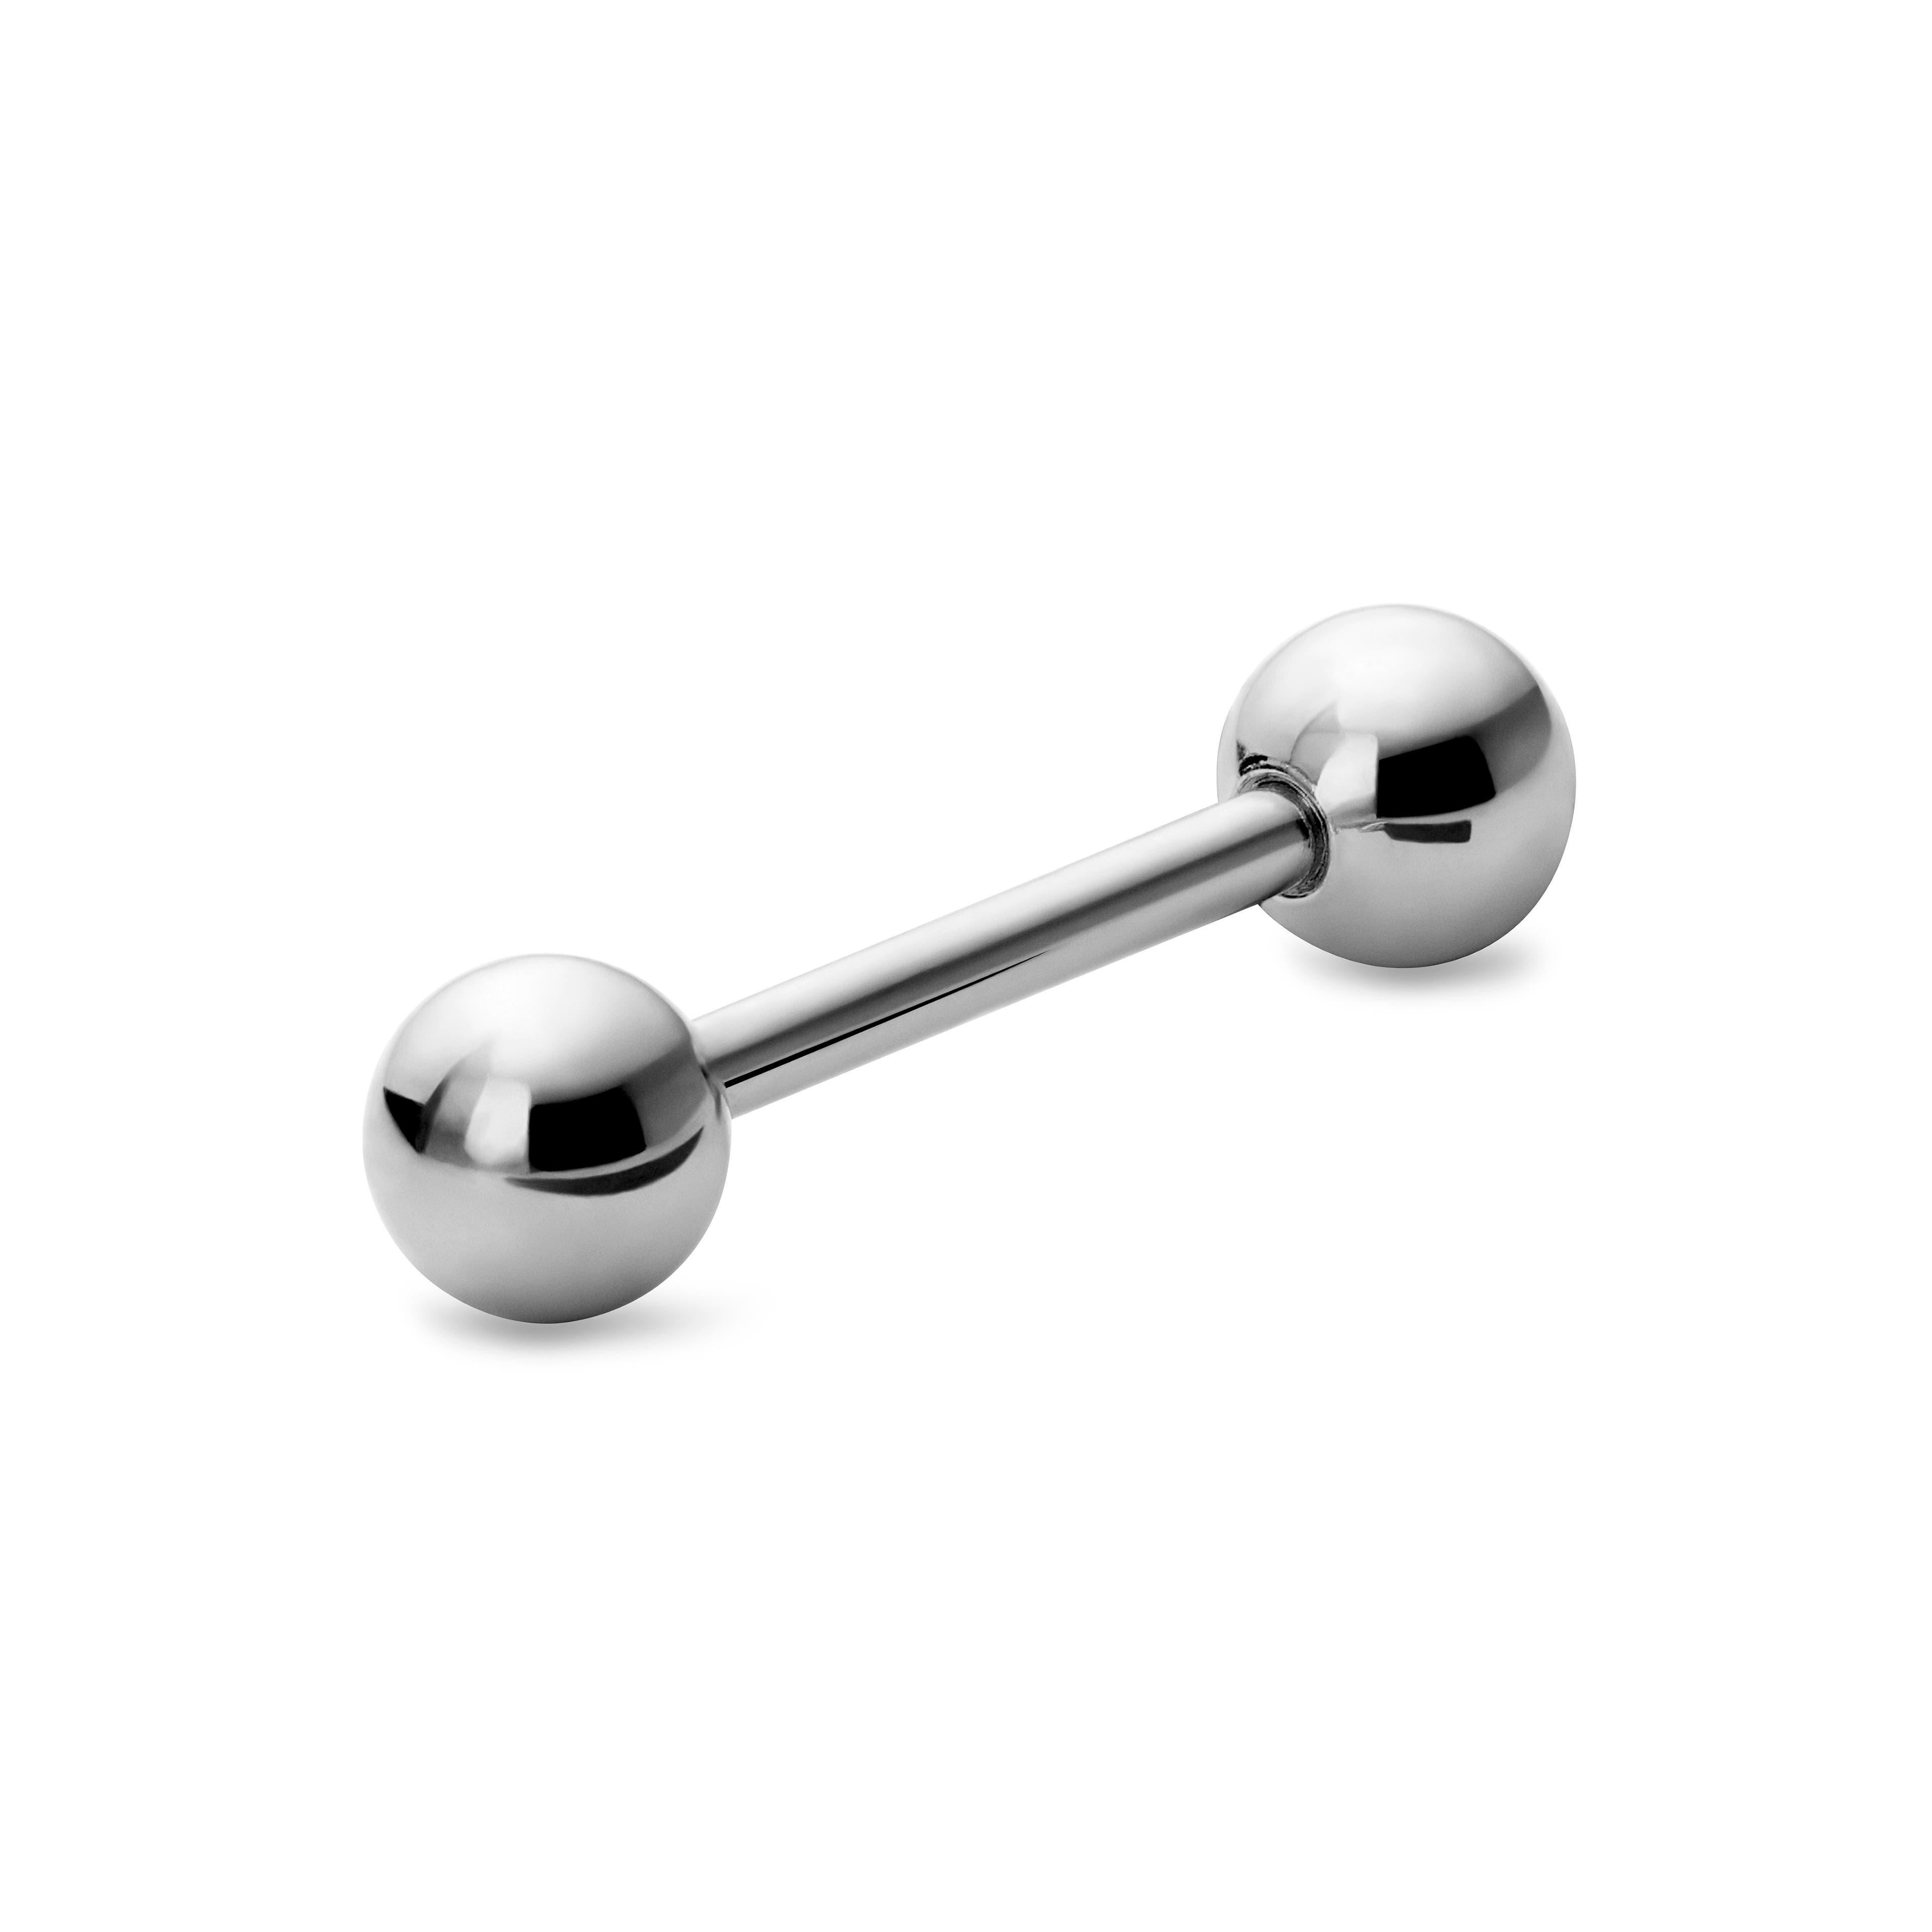 8 mm Silver-Tone Straight Ball-Tipped Titanium Barbell